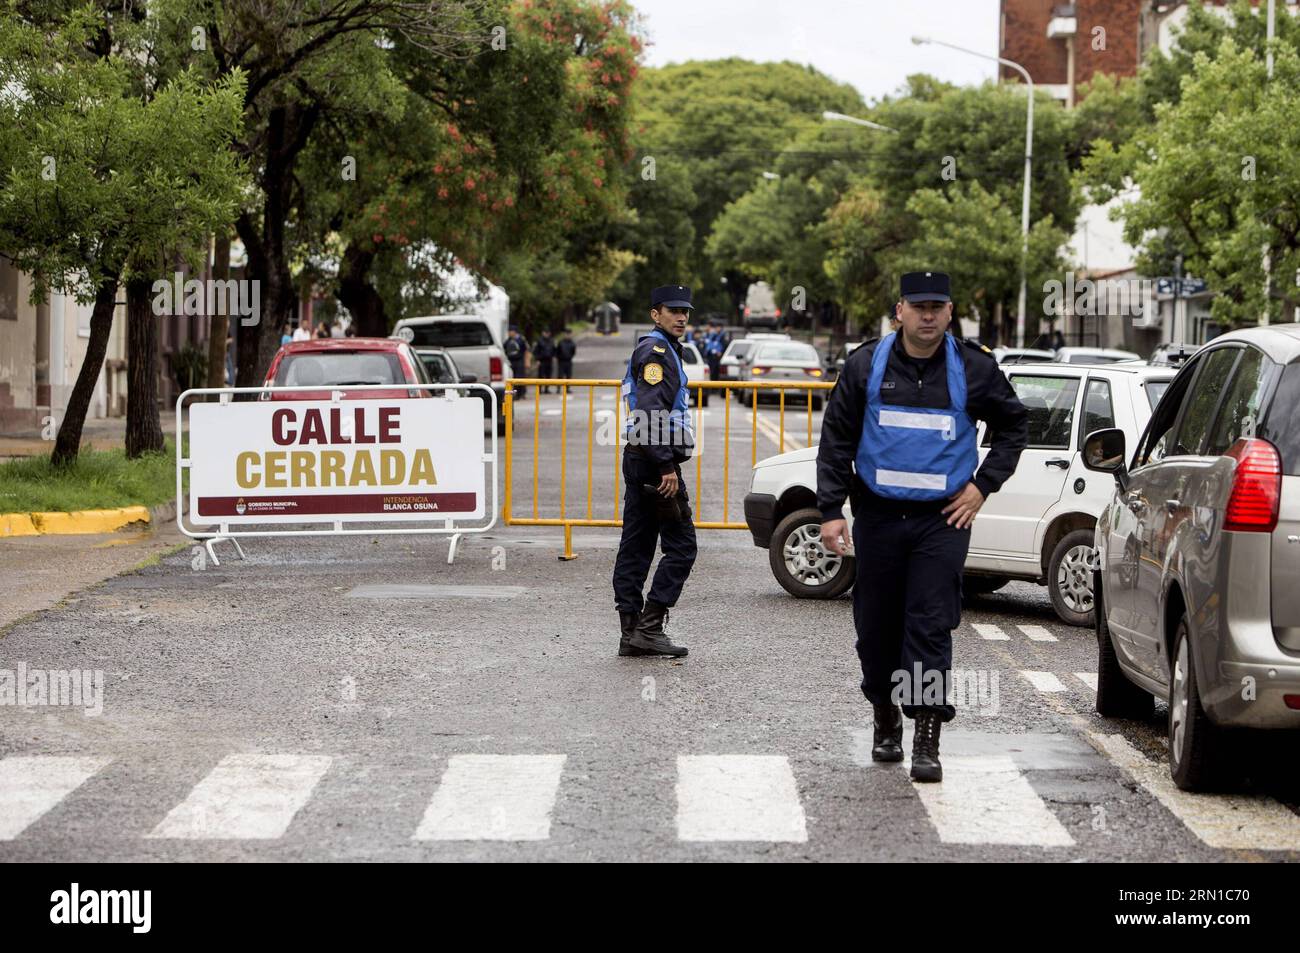 (141216) -- PARANA, Dec. 16, 2014 -- Entre Rios Province Police elements patrol in front of the headquarters of 47th Southern Common Market (MERCOSUR) trade bloc presidential summit in Alvear Square of Parana city, north of Buenos Aires, Argentina, on Dec. 16, 2014. The 47th Southern Common Market (MERCOSUR) trade bloc presidential summit will open on Wednesday in Parana. Martin Zabala) ARGENTINA-PARANA-MERCOSUR-SUMMIT e MARTINxZABALA PUBLICATIONxNOTxINxCHN   Parana DEC 16 2014 Entre Rios Province Police Element Patrol in Front of The Headquarters of 47th Southern Common Market Mercosur Trade Stock Photo